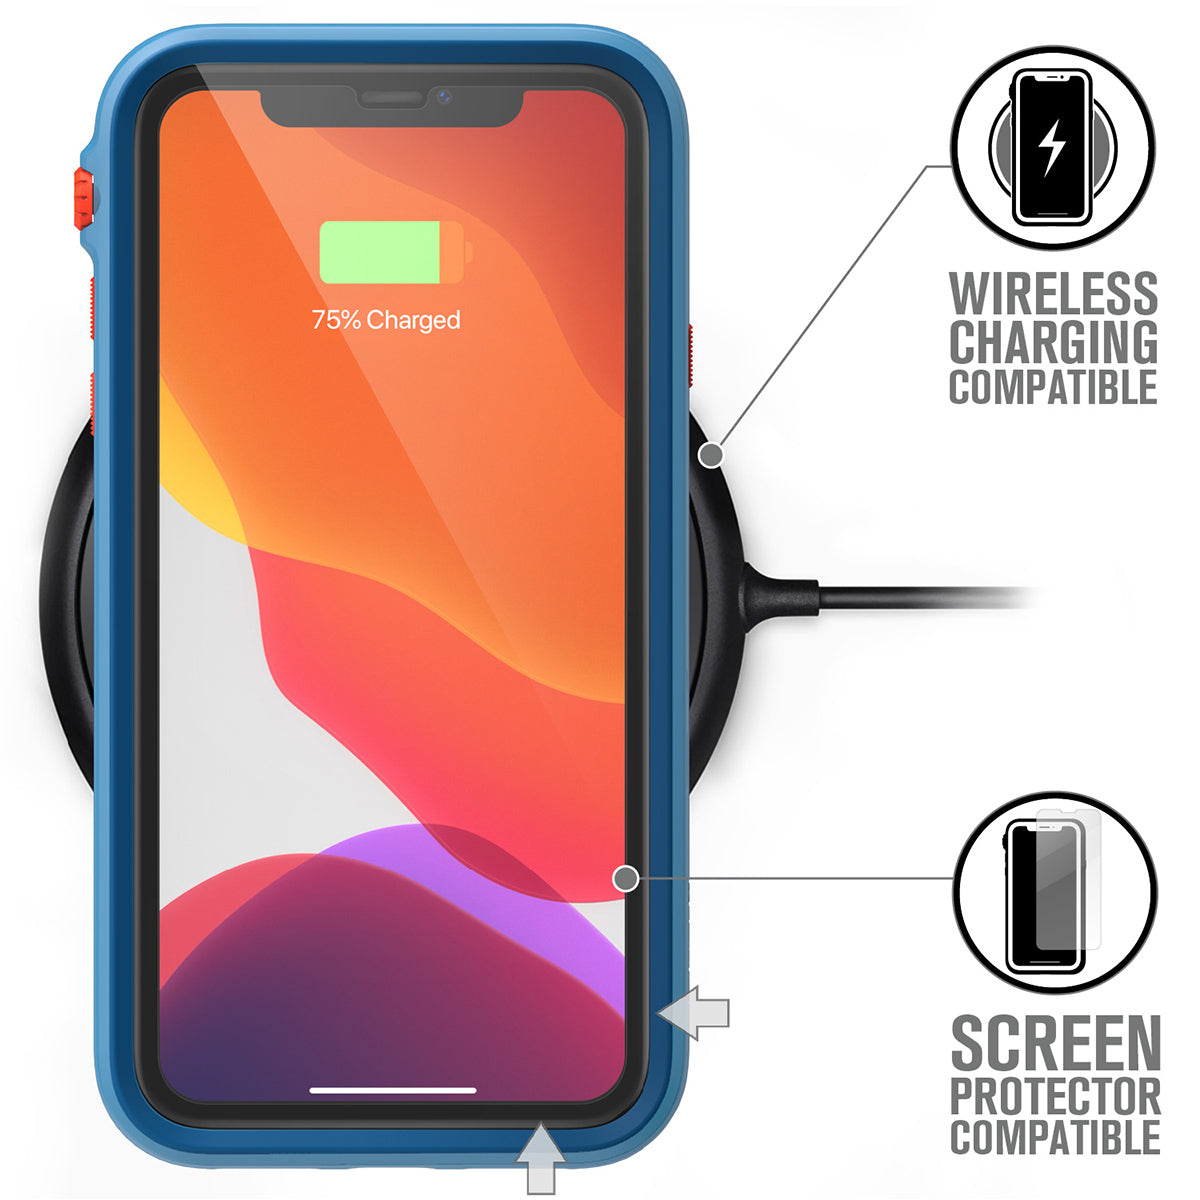 catalyst iPhone 11 series impact protection case for iphone 11 blueridge sunset placed on the wireless charger 75% charged text reads wireless charging compatible screen protector compatible